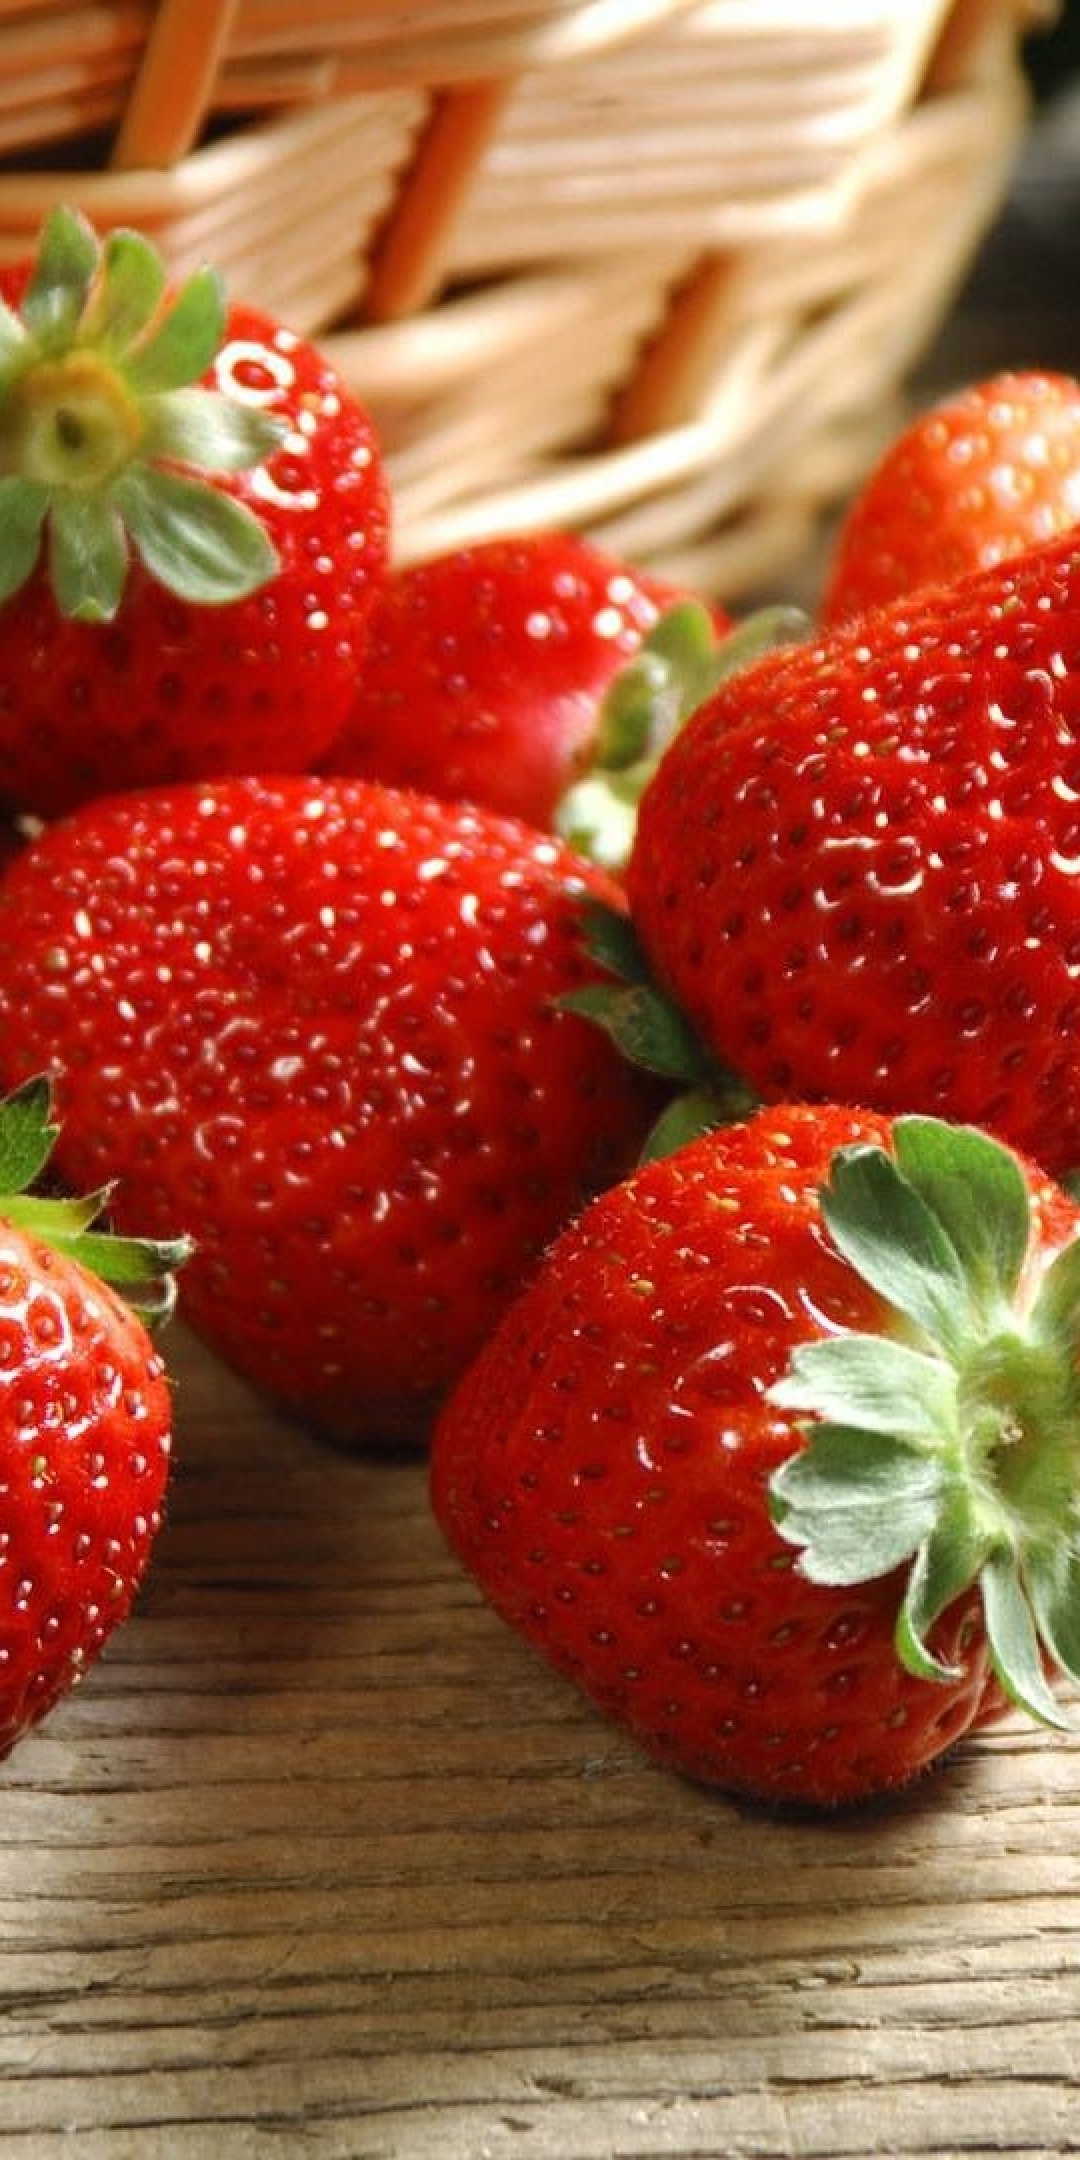 Image: Strawberry, berry, garden, red